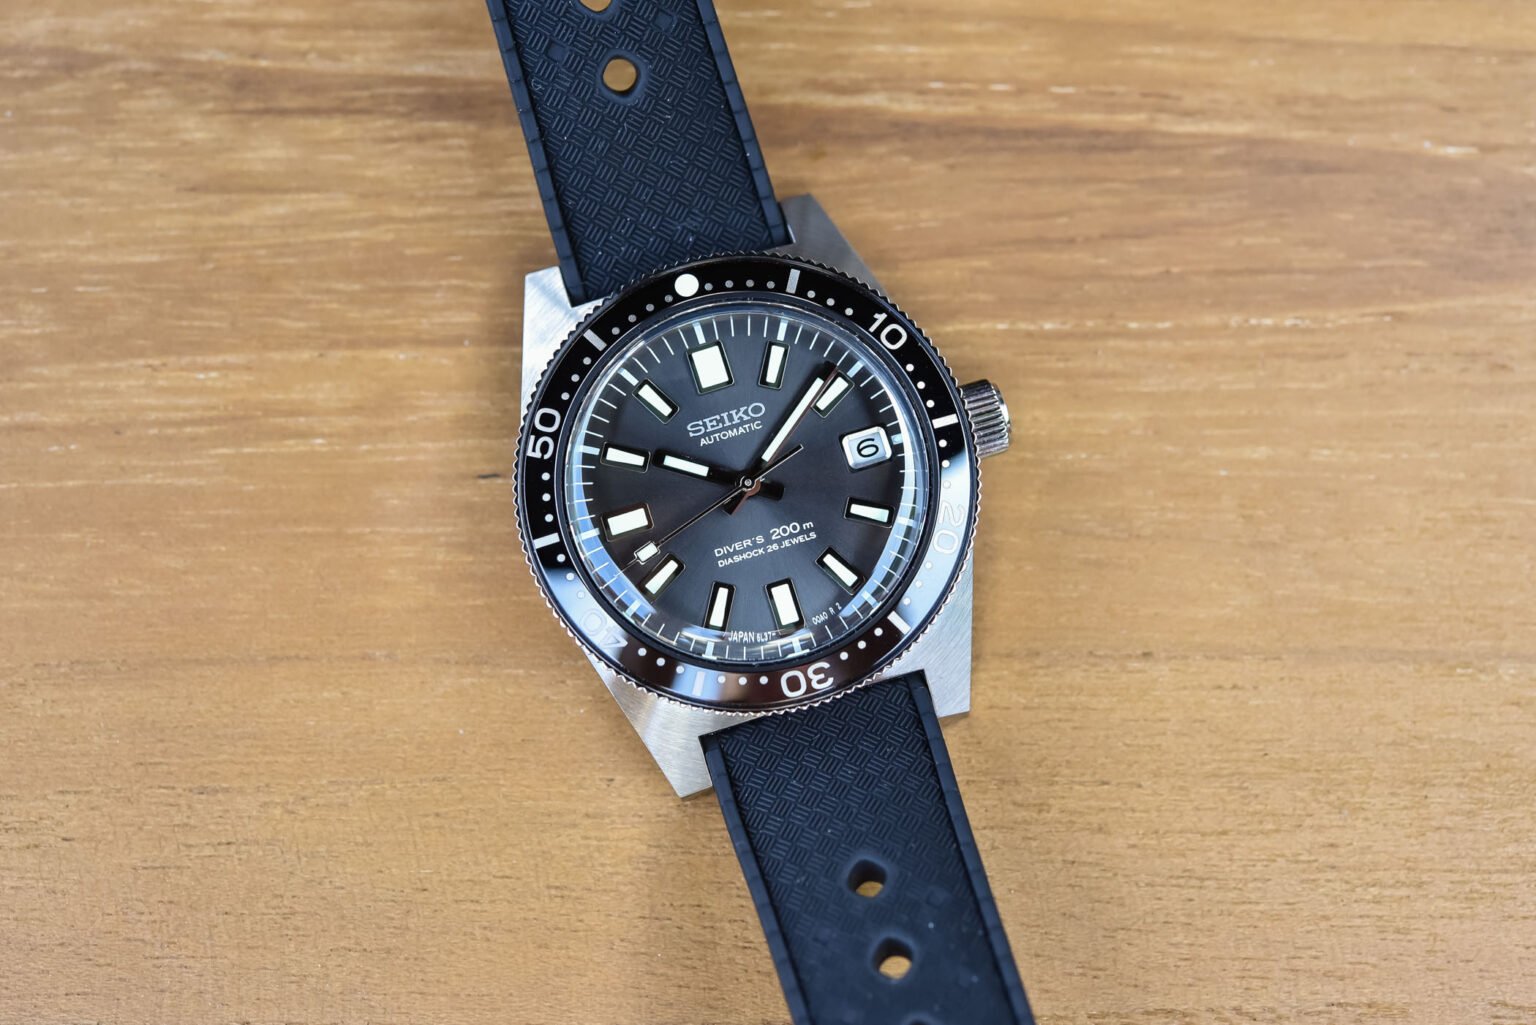 Seiko-Prospex-1965-Divers-Re-creation-62MAS-Limited-Edition-SJE093-Calibre-6L37-hands-on-review-6-1536x1025.jpg